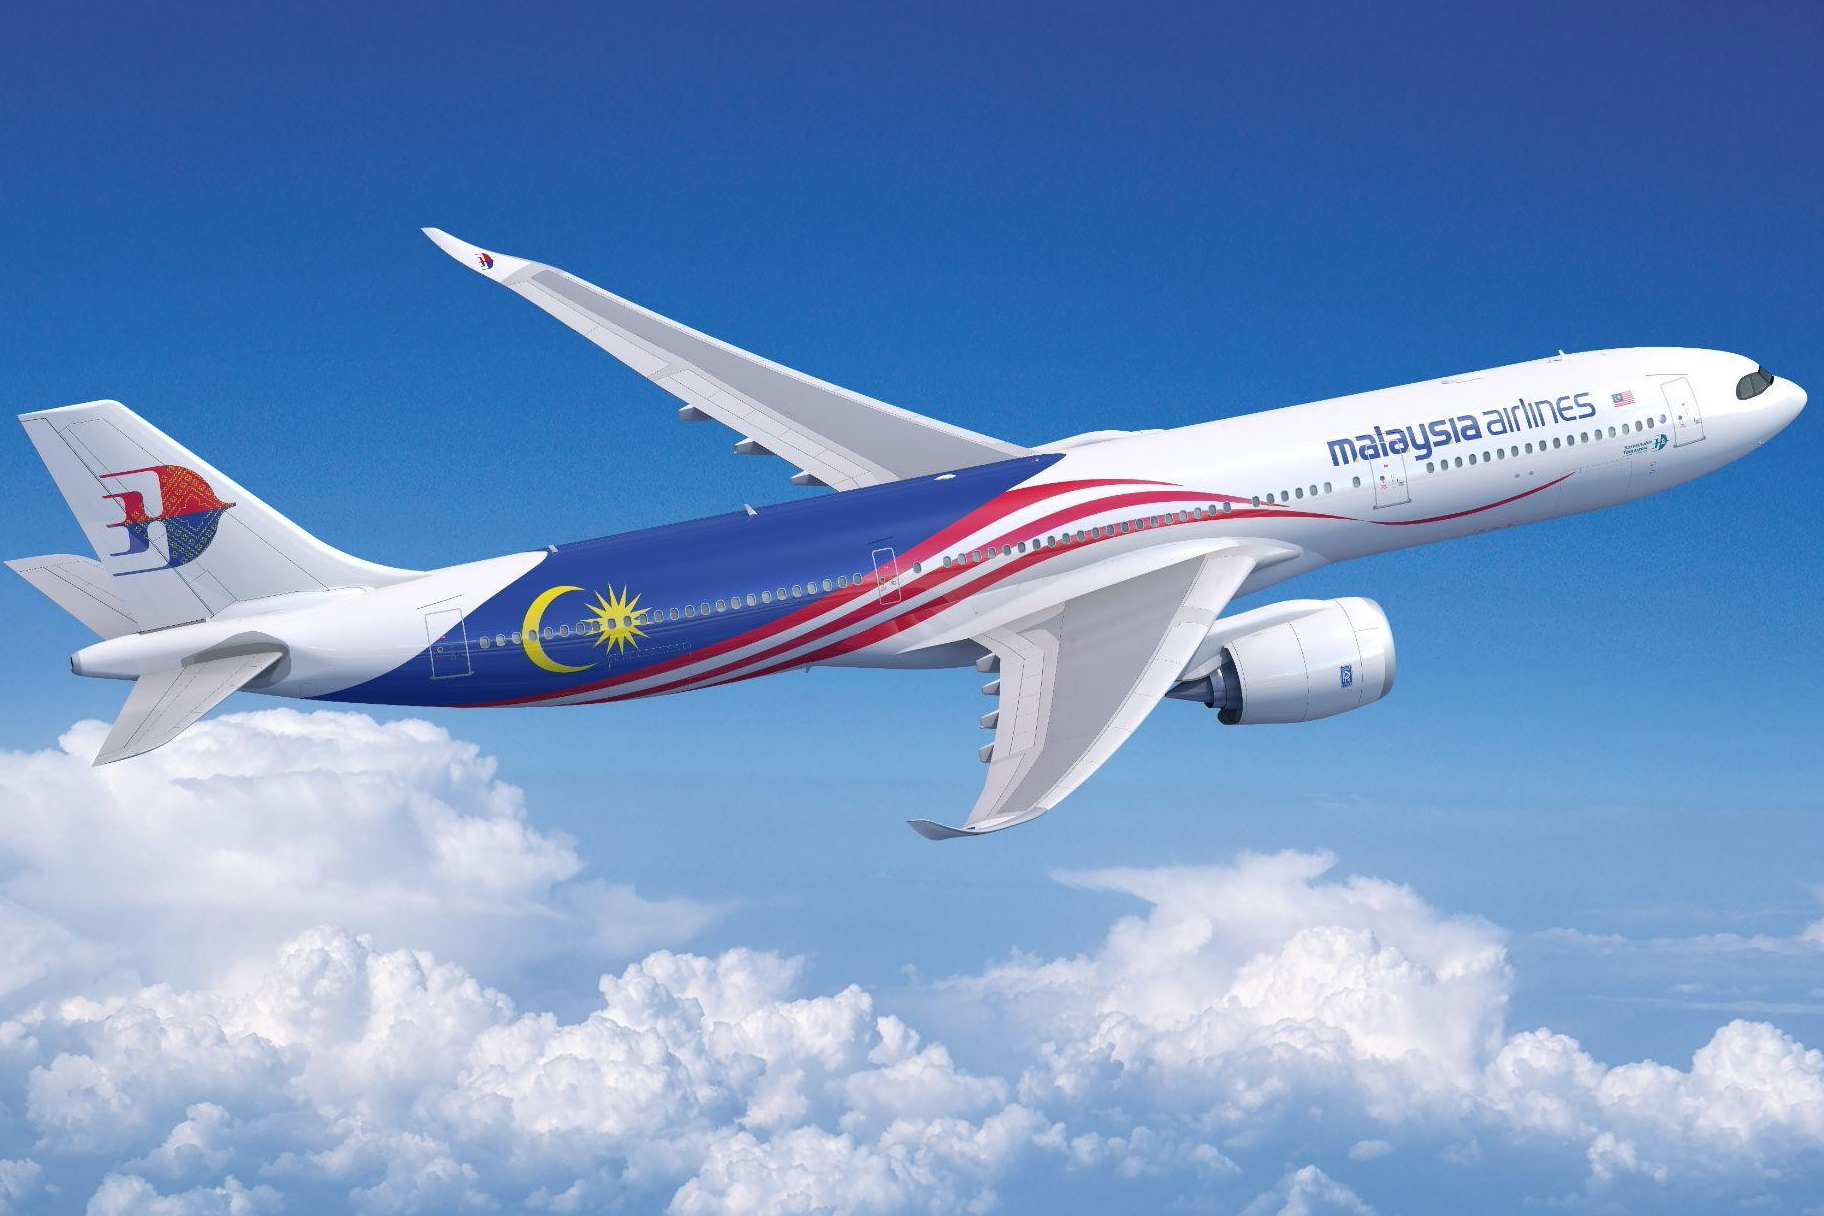 Malaysia Airlines Airbus A330neo. Click to enlarge.